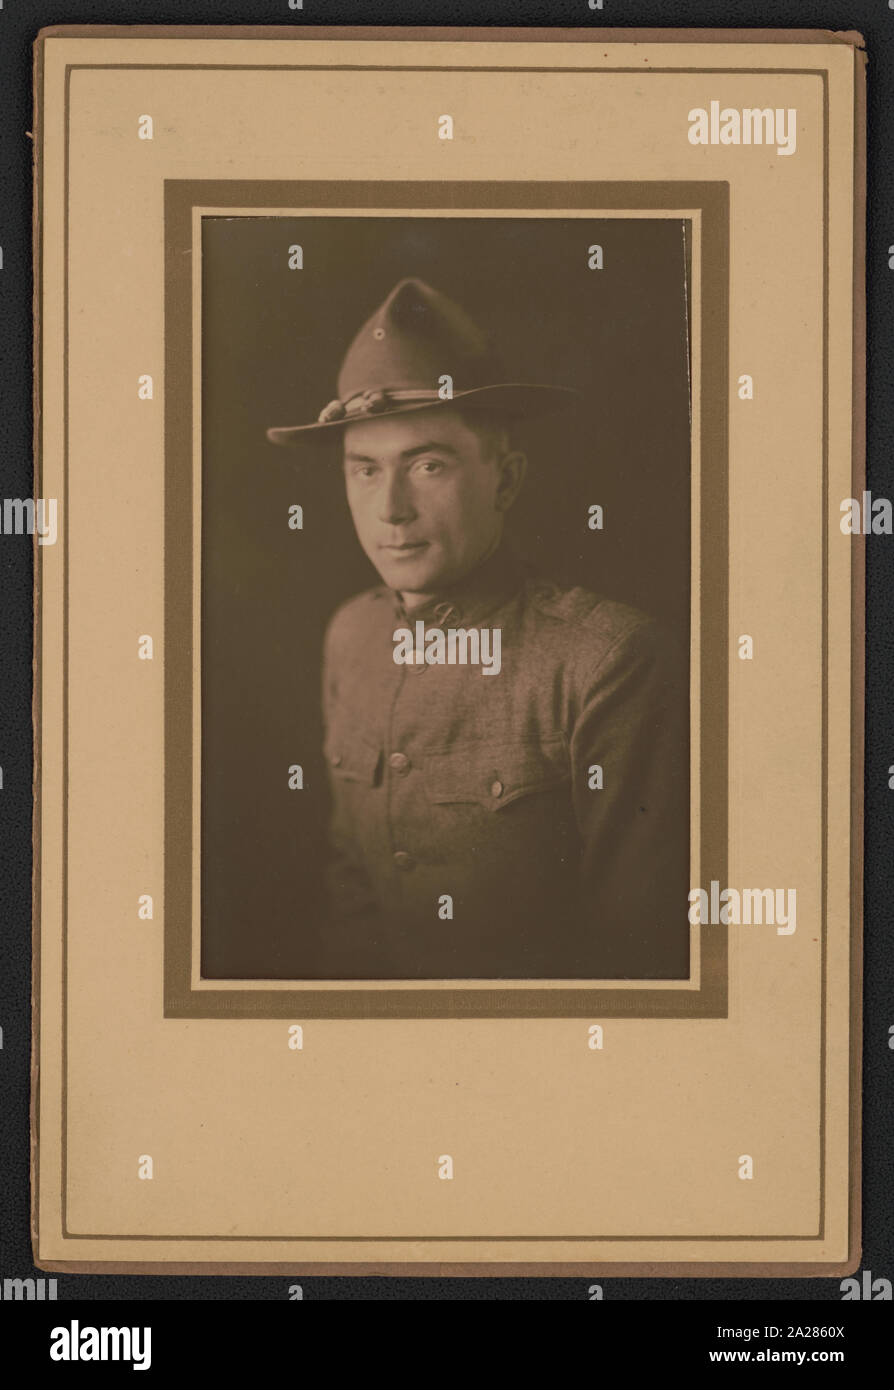 Private Elisha Warriner of Co. I, 120th Infantry, 30th Division in uniform Stock Photo